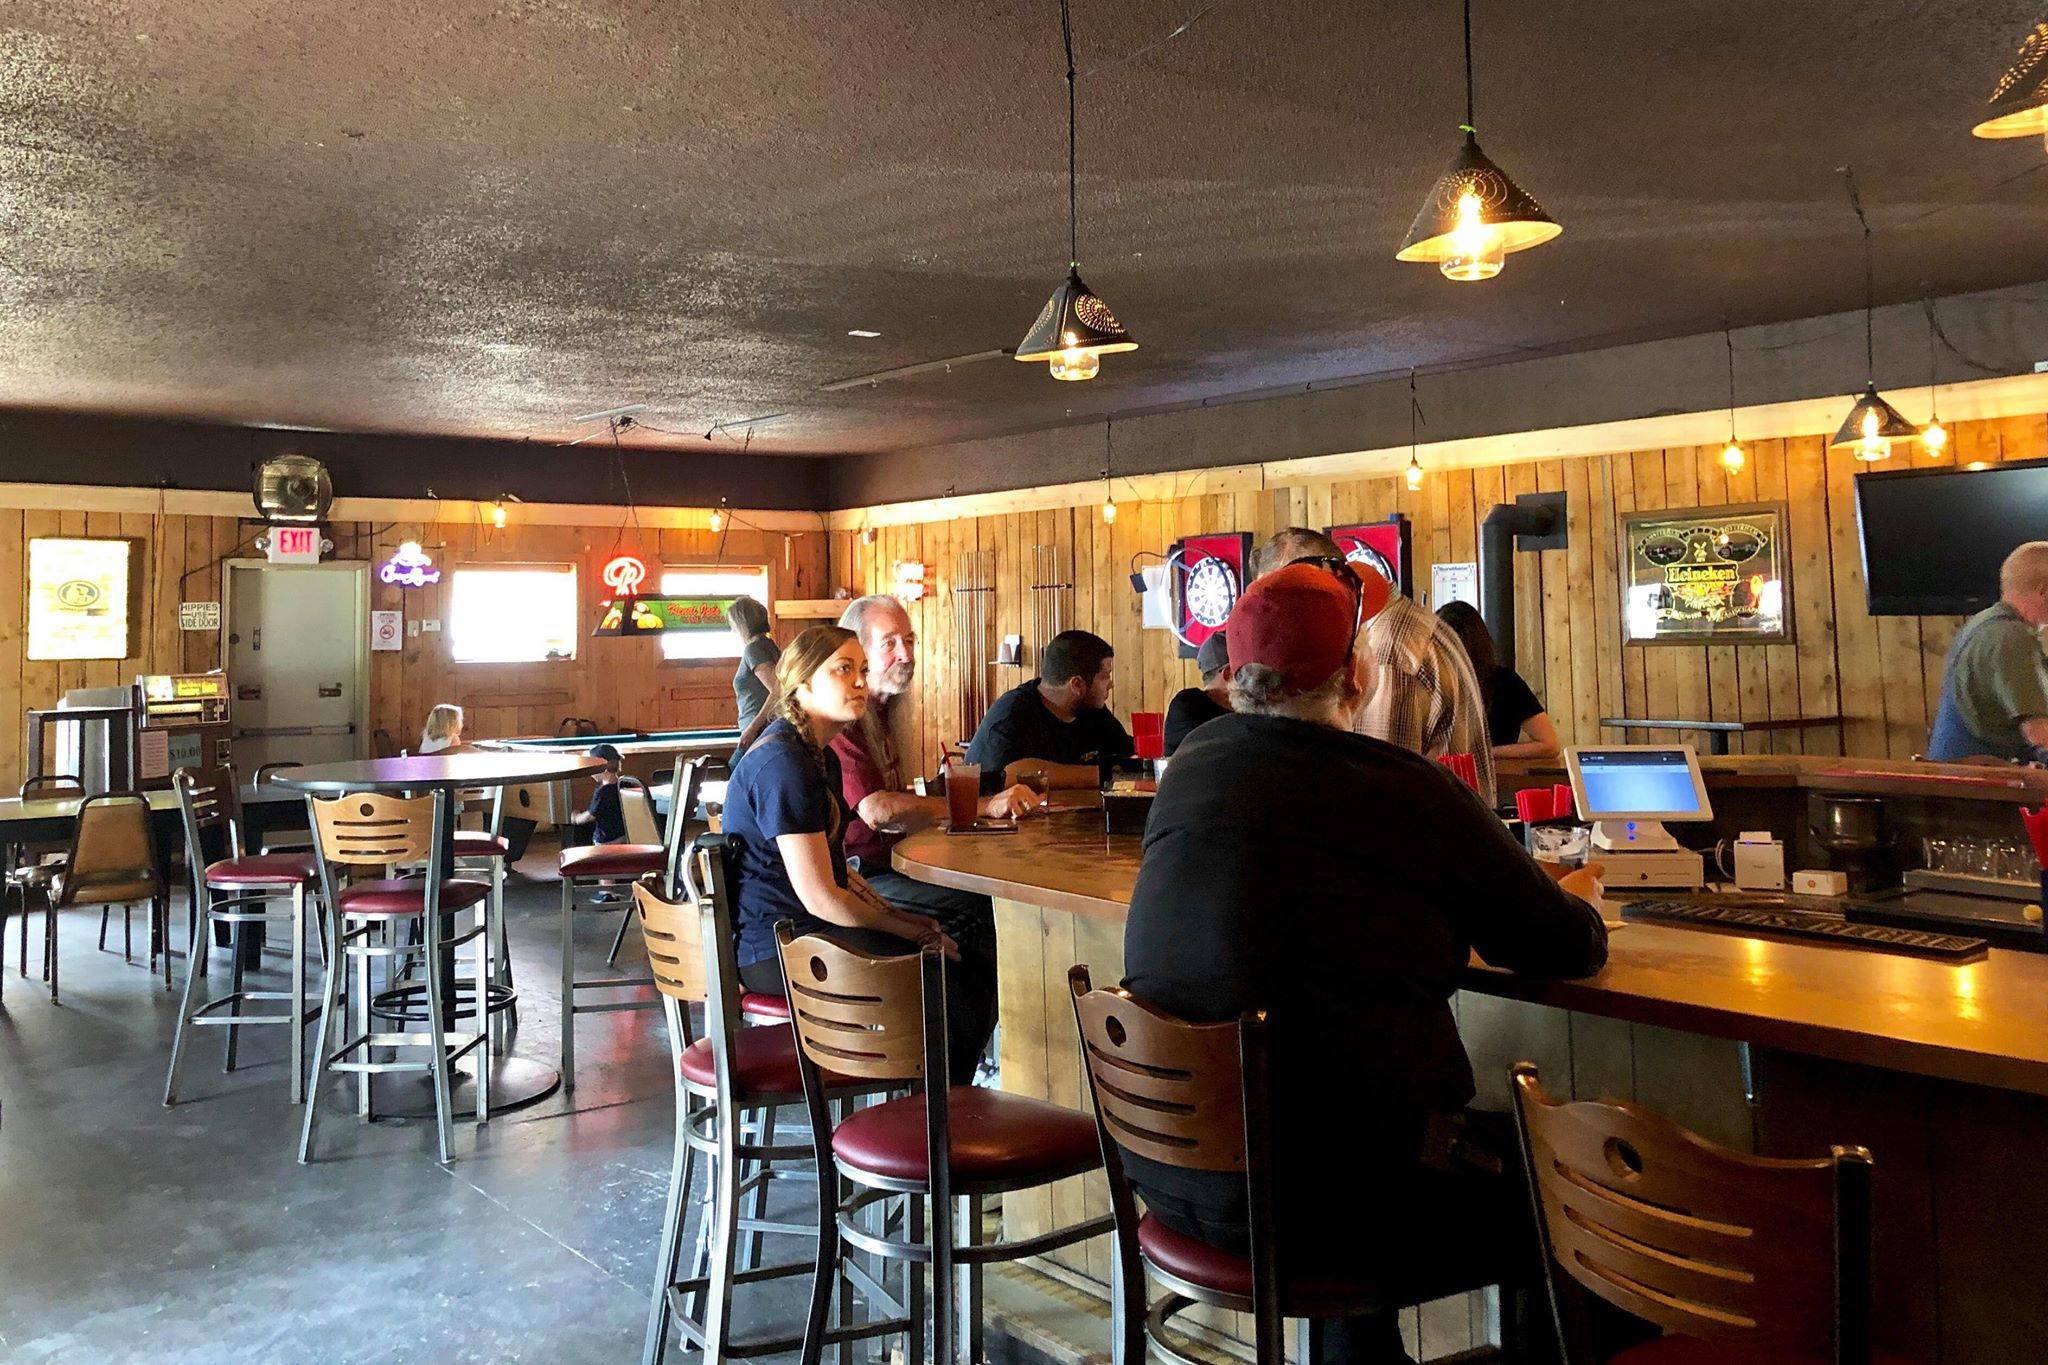 Kenai Joe’s Taphouse serves their first patrons under new ownership on Monday, July 1, 2019, in Old Town Kenai, Alaska. (Photo by Victoria Petersen/Peninsula Clarion)